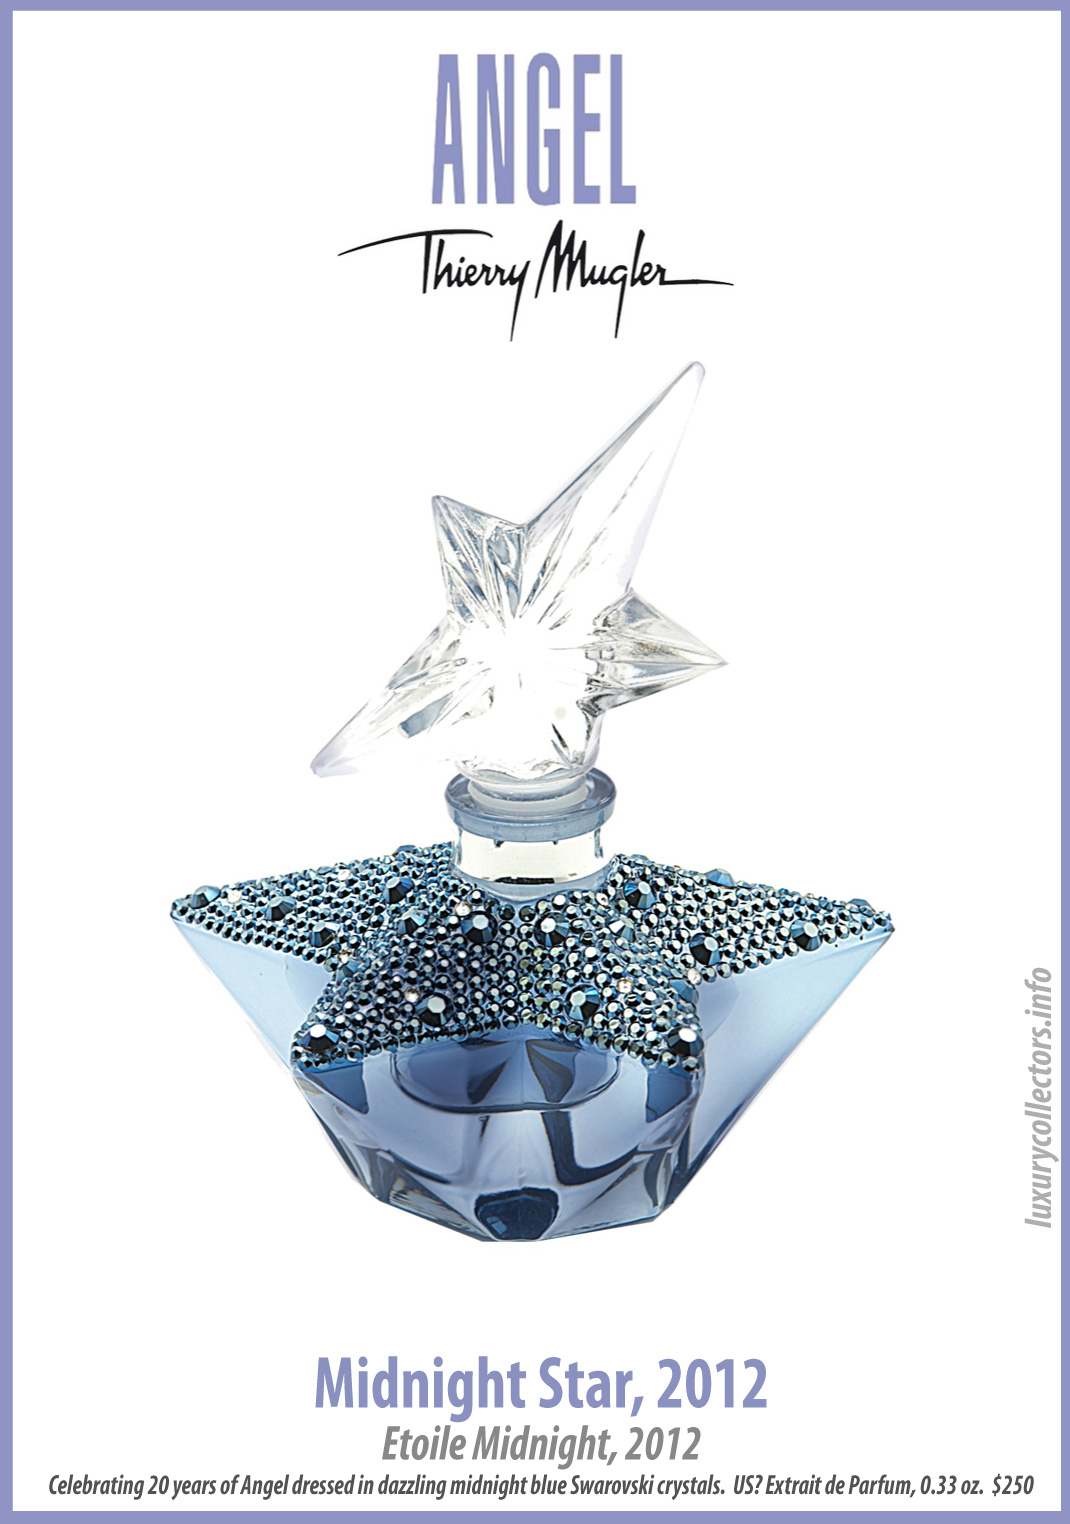 Thierry Mugler Angel 20 Years Perfume Collector's Limited Edition Bottle 2012 Midnight Star